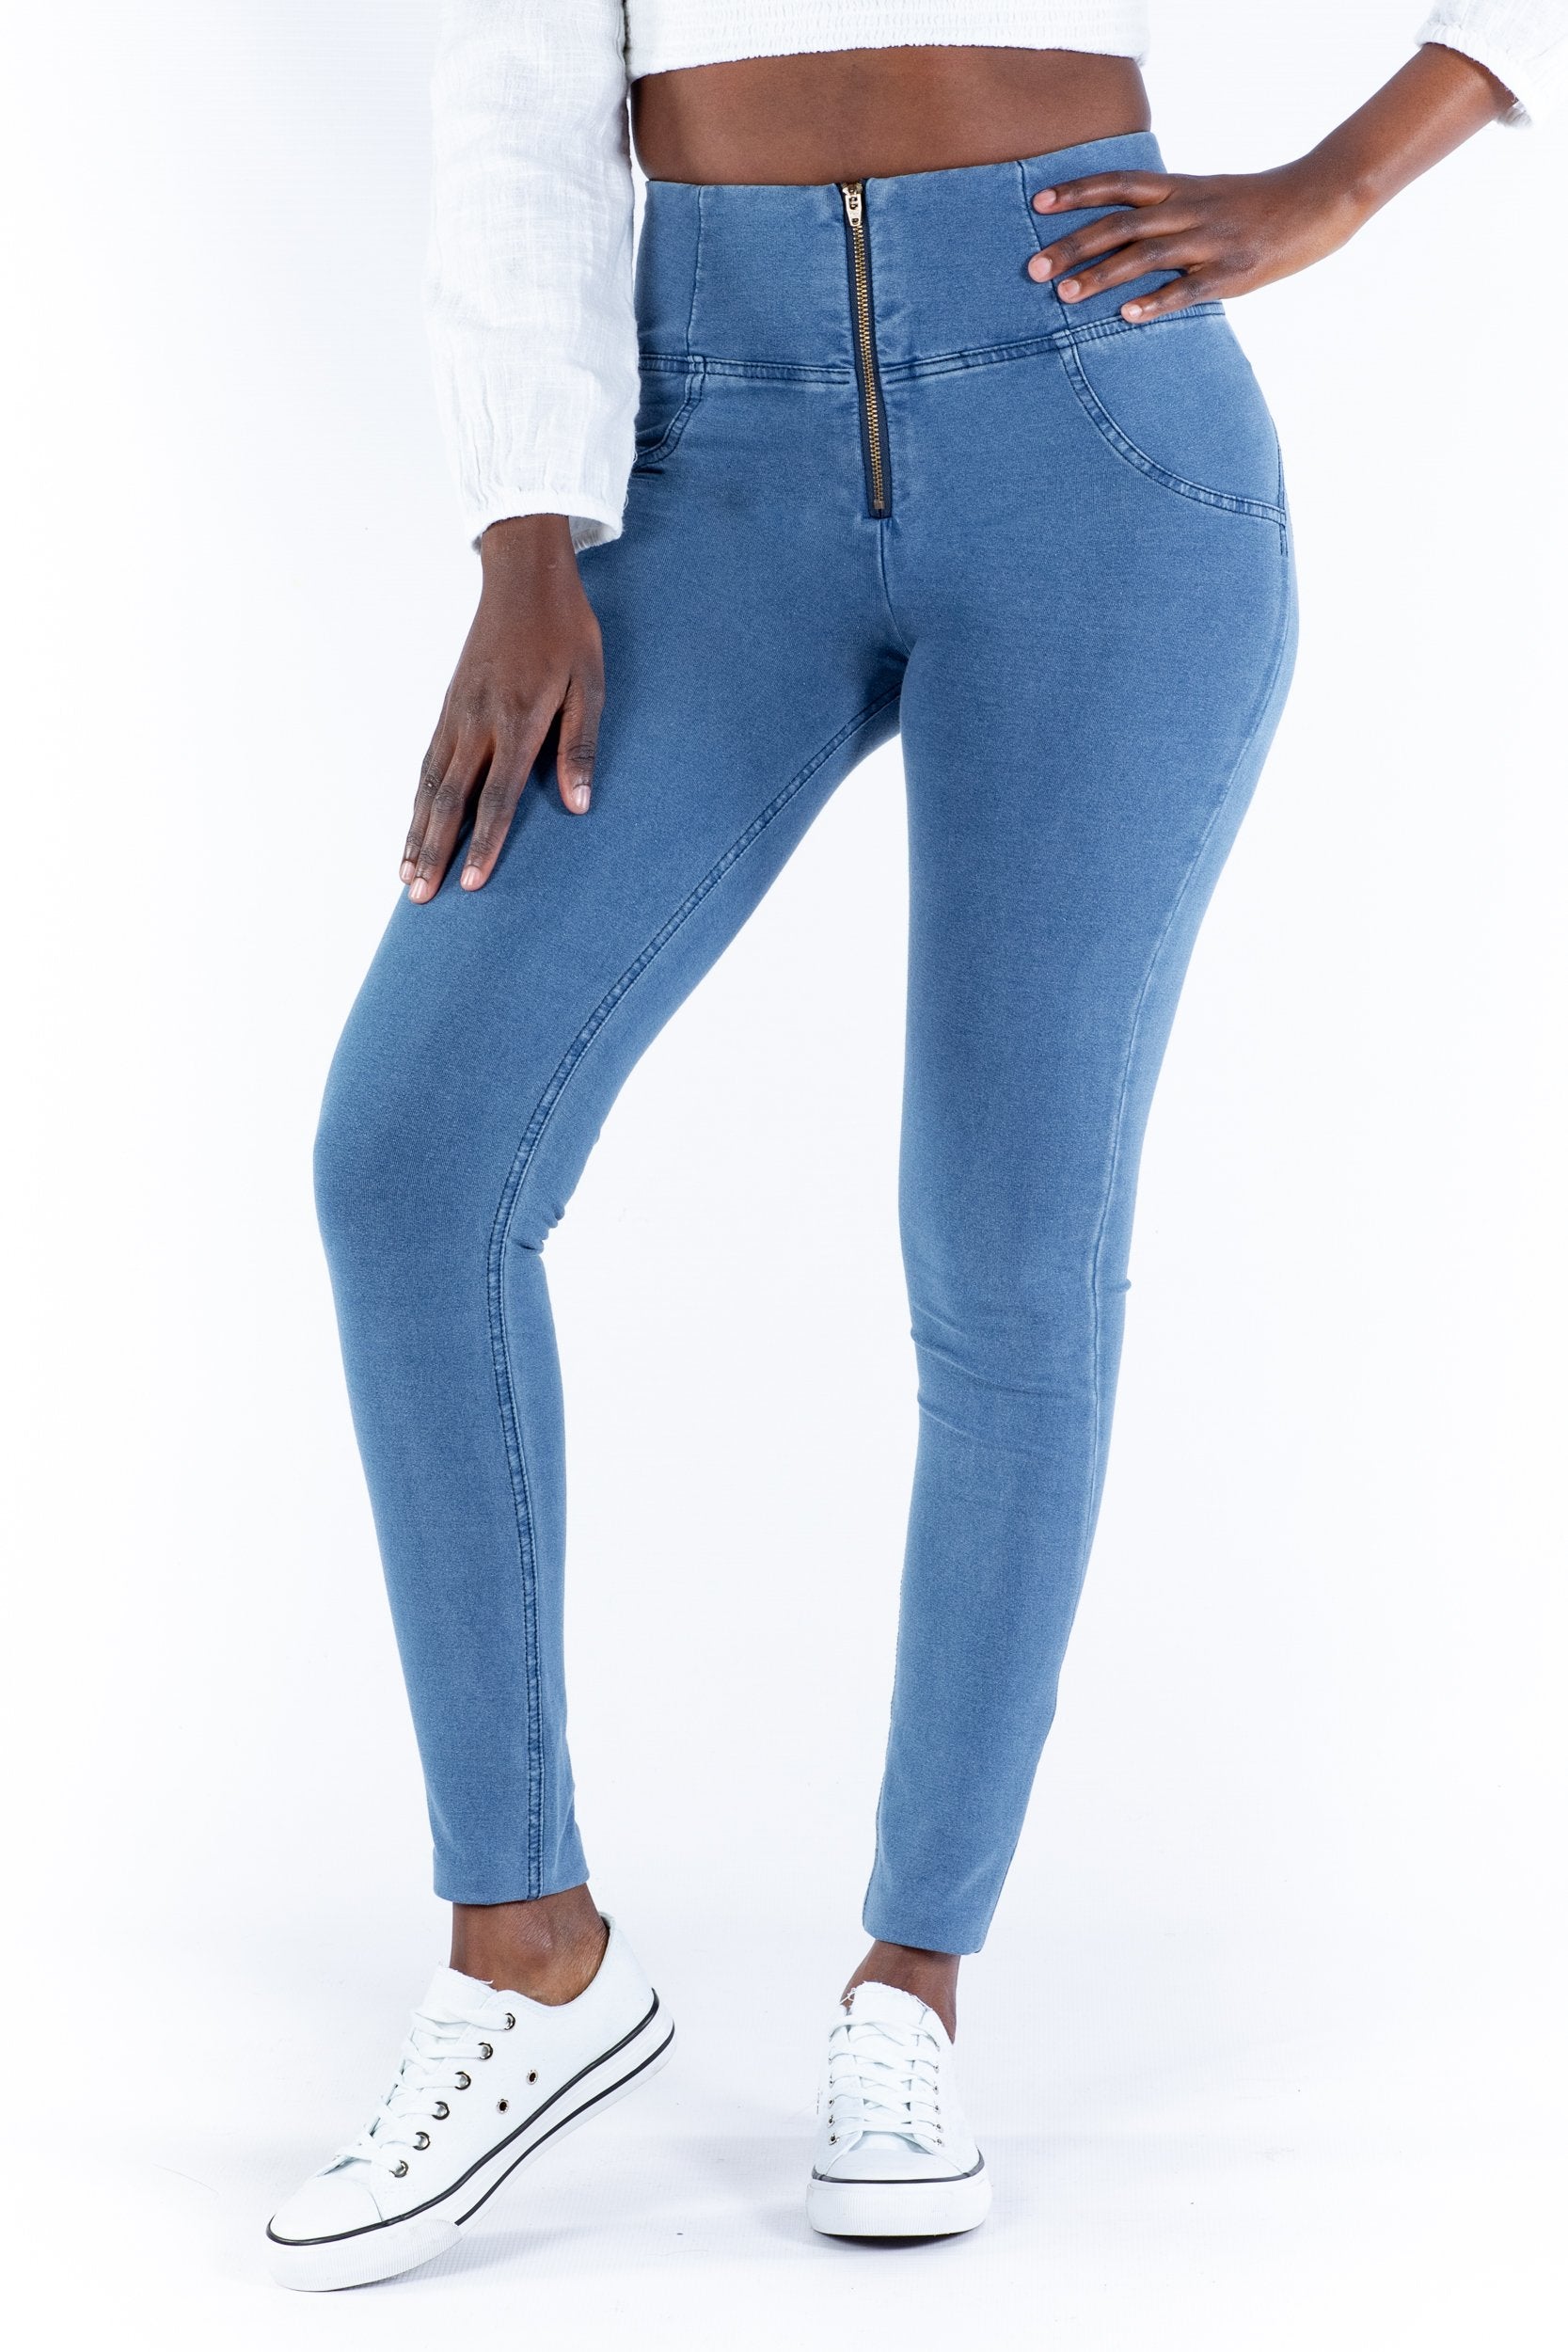 Womens High Waisted Skinny Jeans Stretch Butt Lifting Jeggings